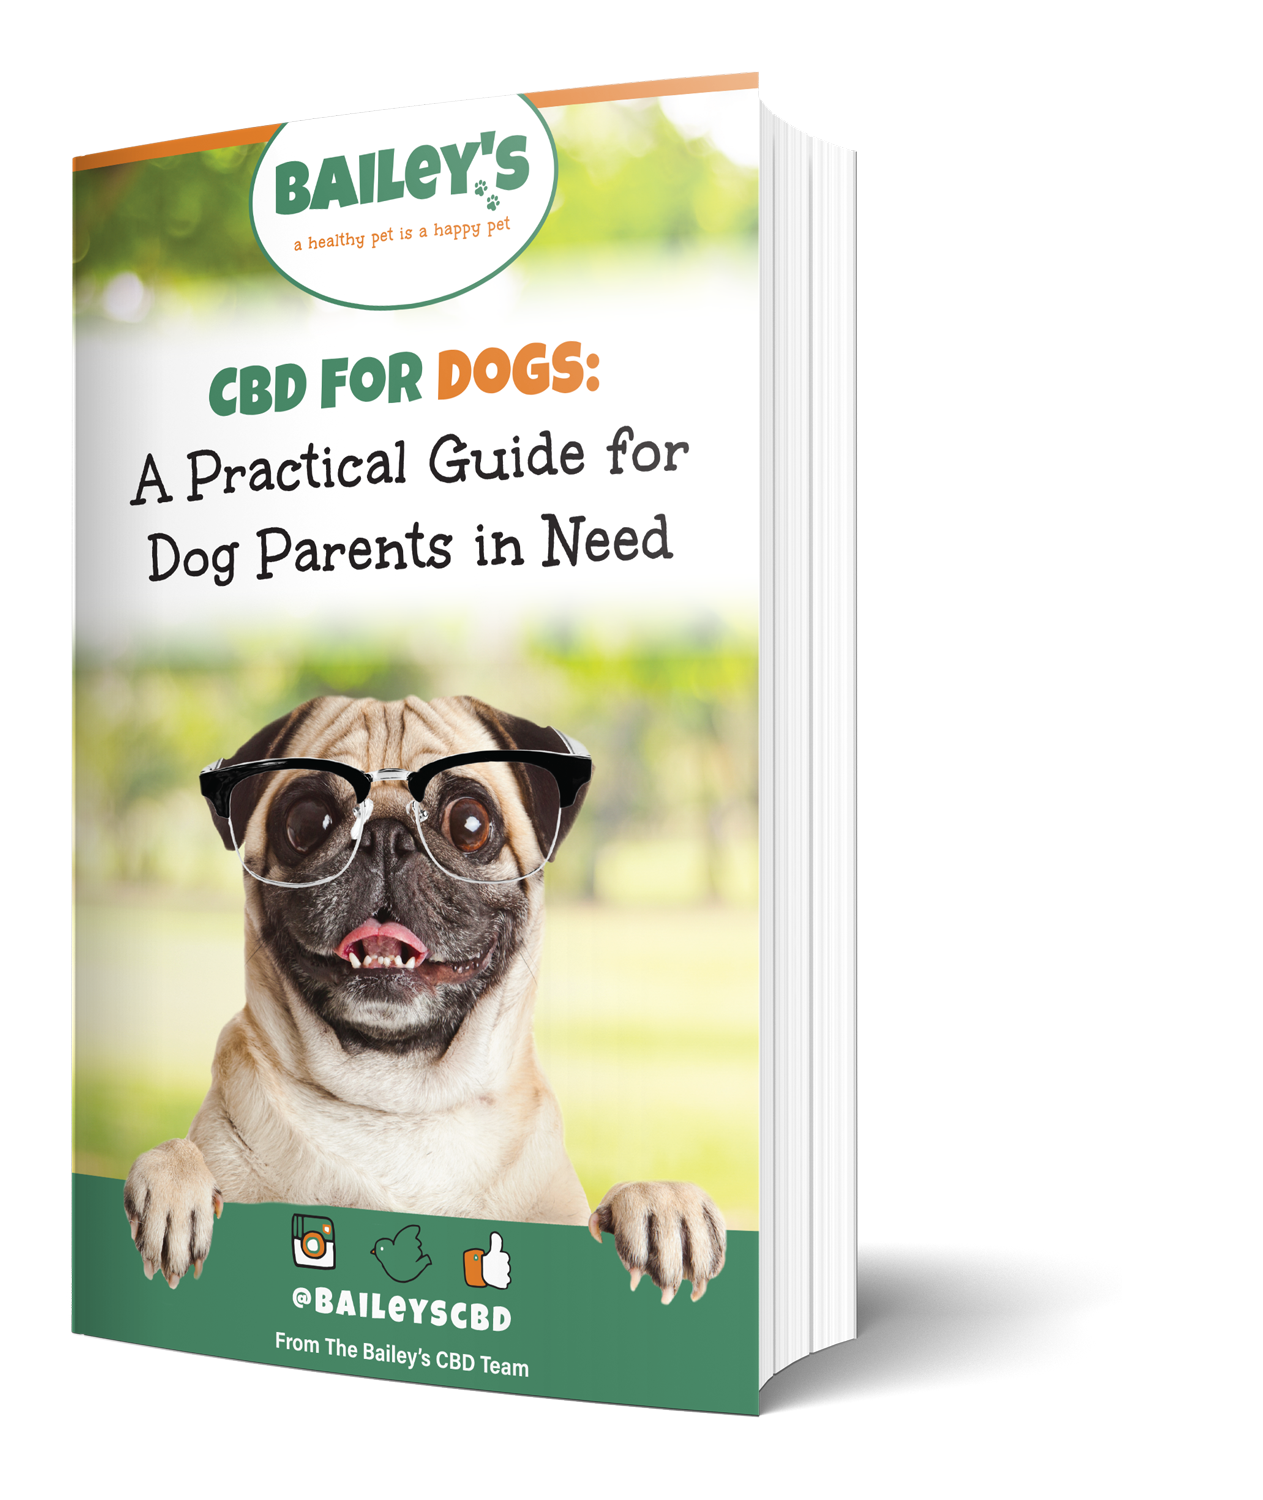 Baileys CBD For Dogs A Practical Guide For Dog Parents In Need